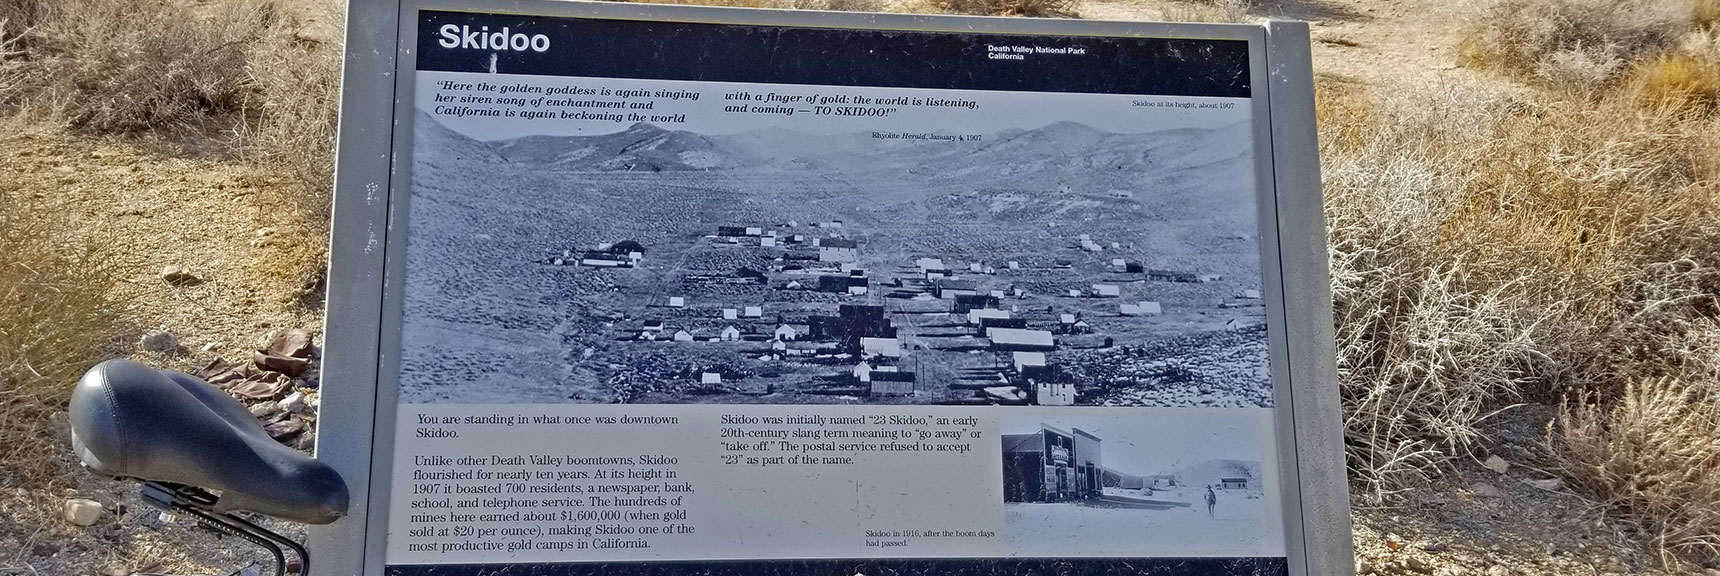 Interpretive Sign Shows Skidoo at its Height 1907-1917 | Skidoo Stamp Mill, Panamint Mountains, Death Valley National Park, CA